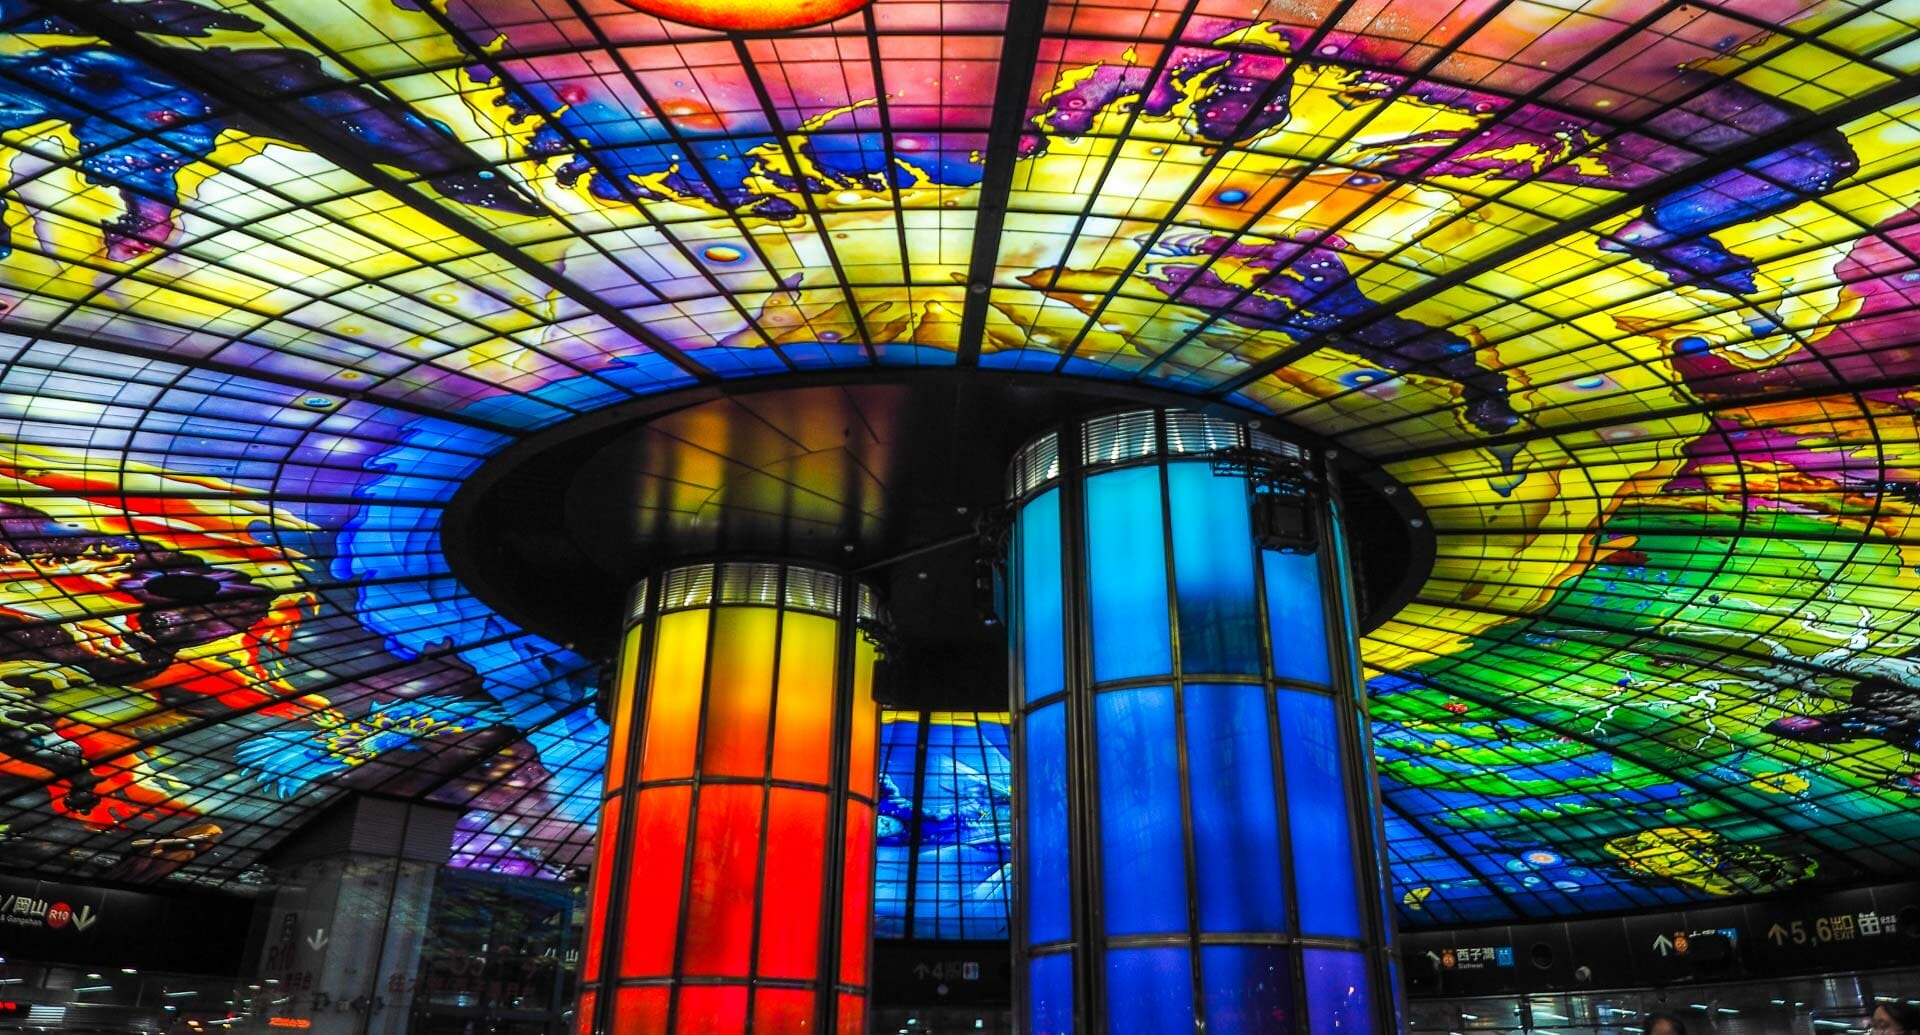 50 Things to Do in Kaohsiung, Taiwan’s Artsy Port City